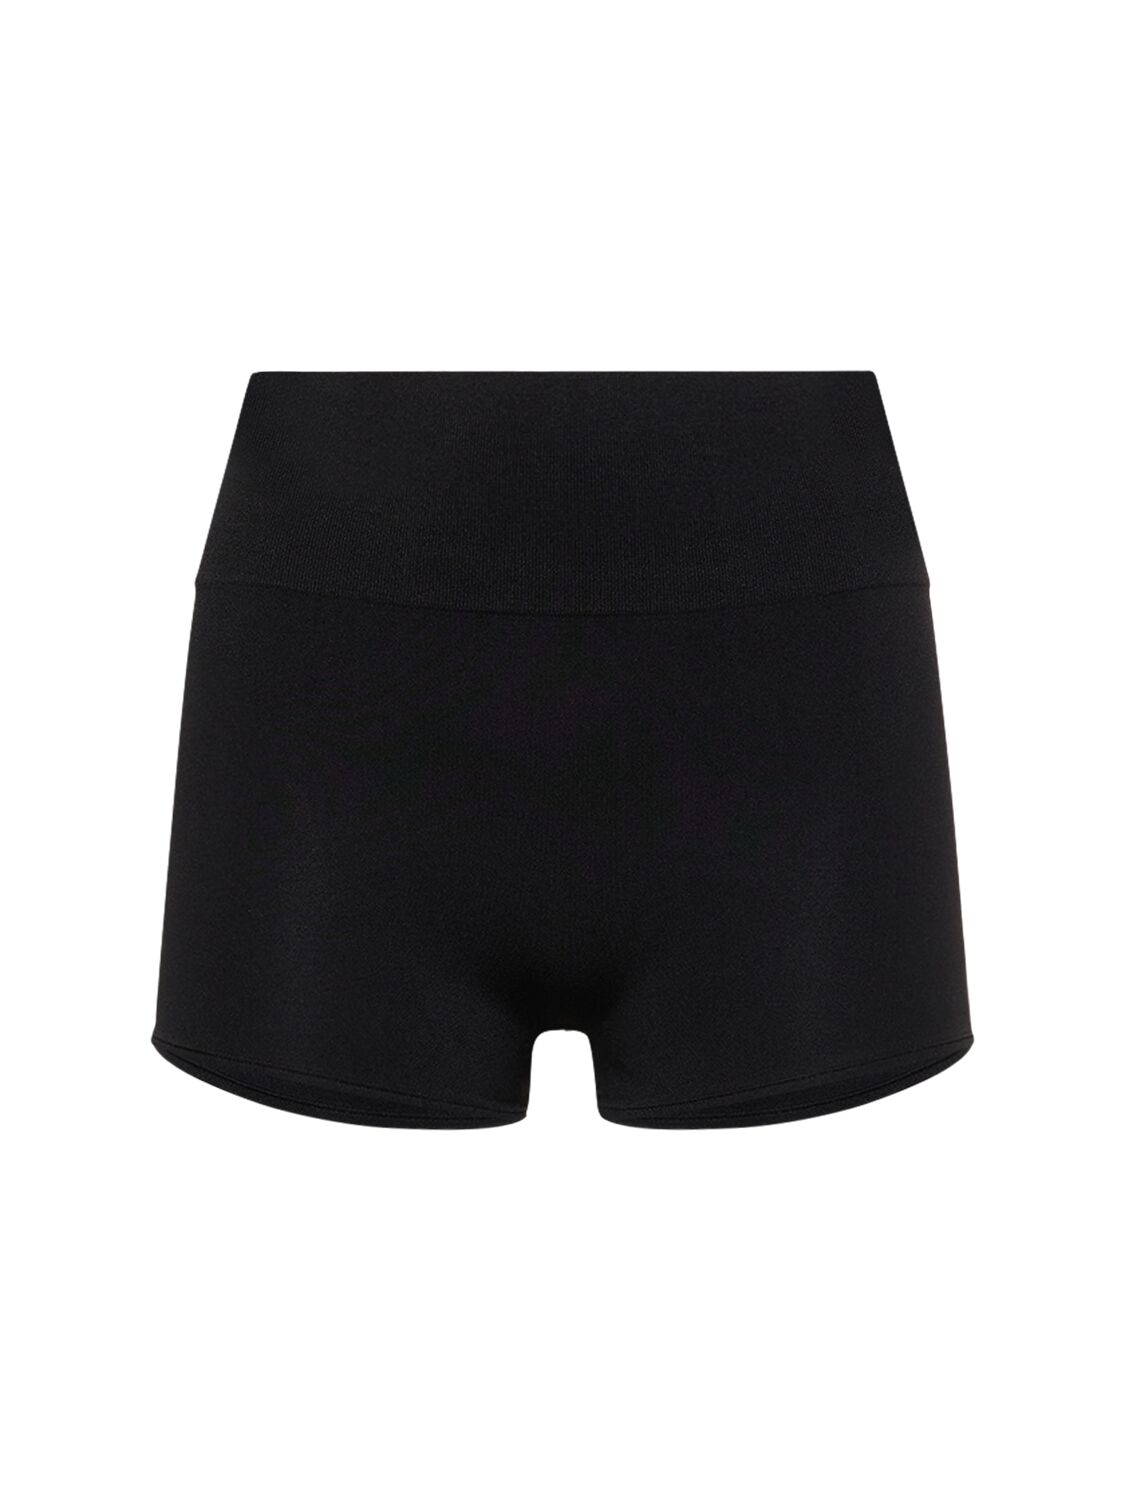 Prism Squared Renew High Waist Hot Pants In Black